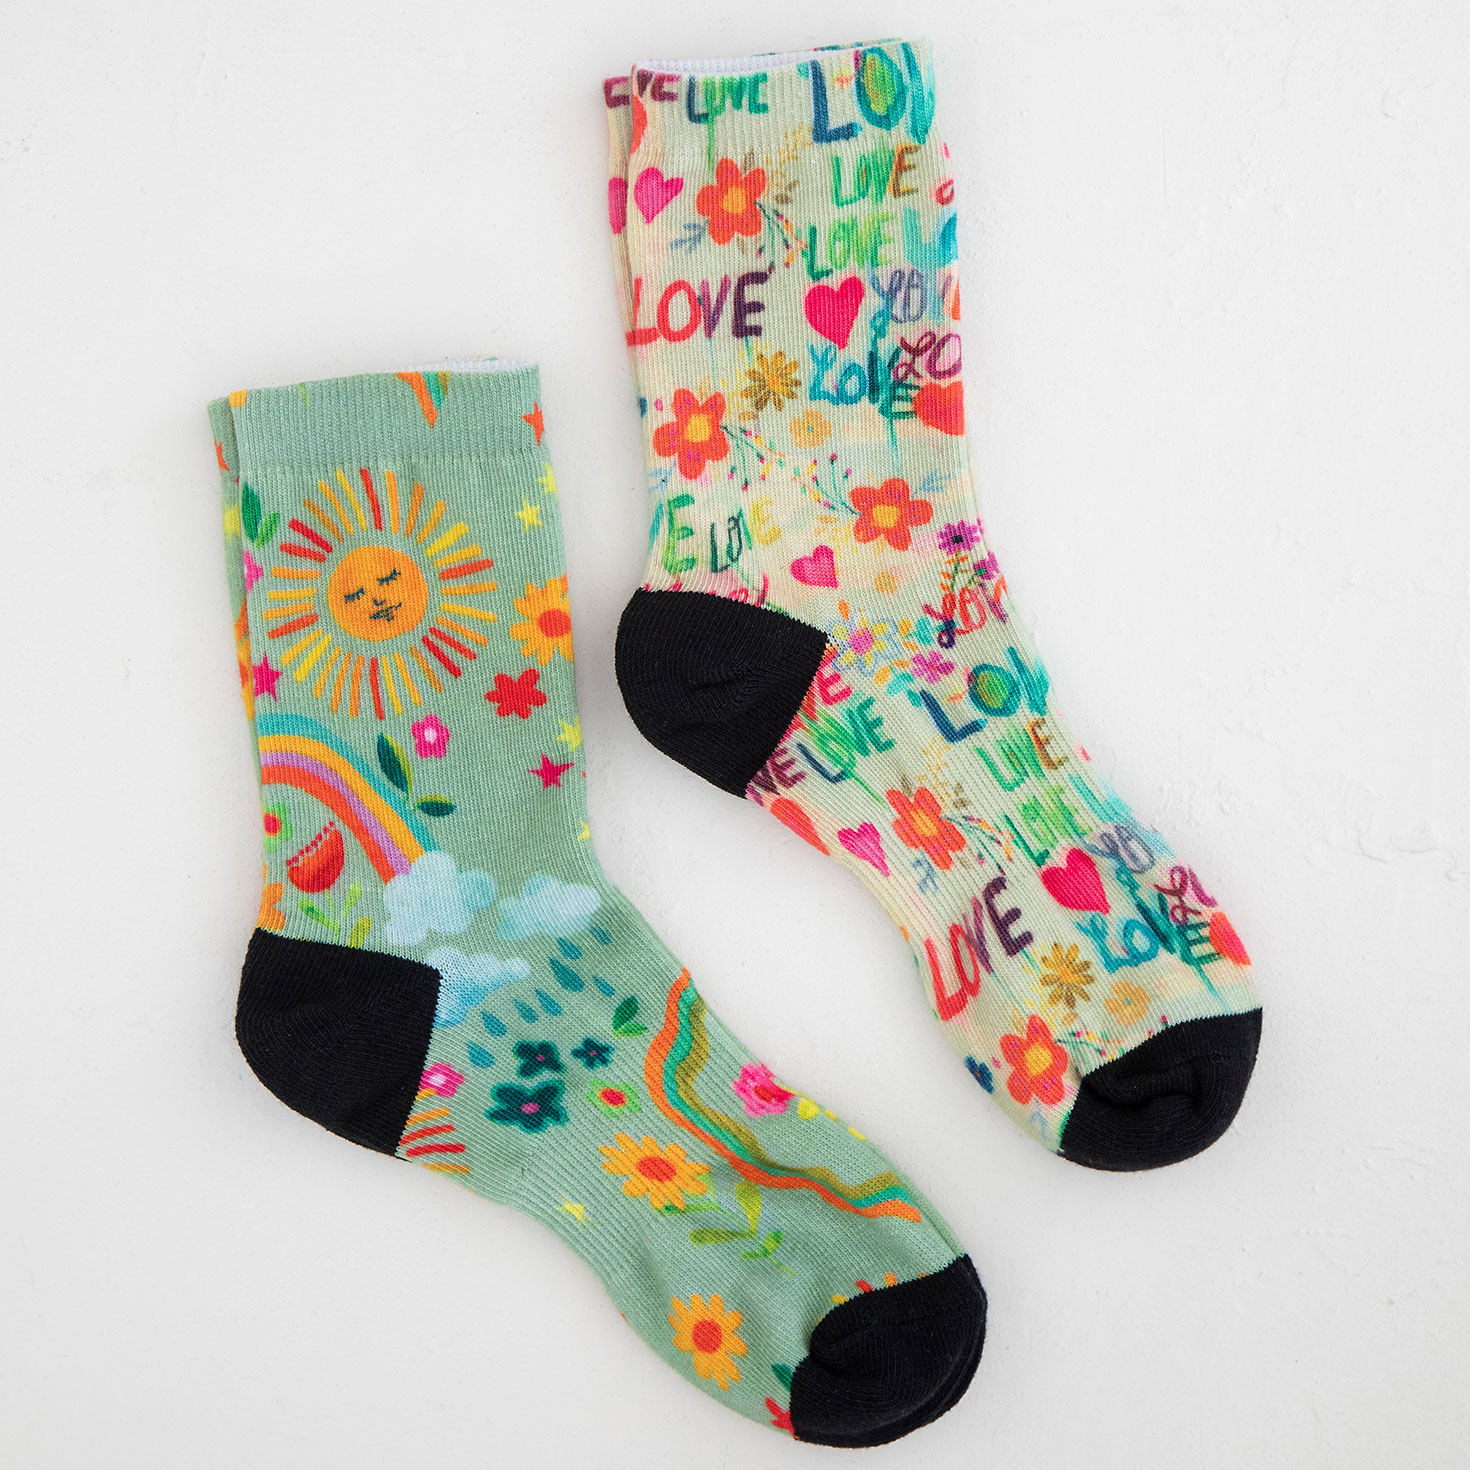 Natural Life Rainbow Floral and Love Crew Socks, 2 pair - Scarves, Hats ...